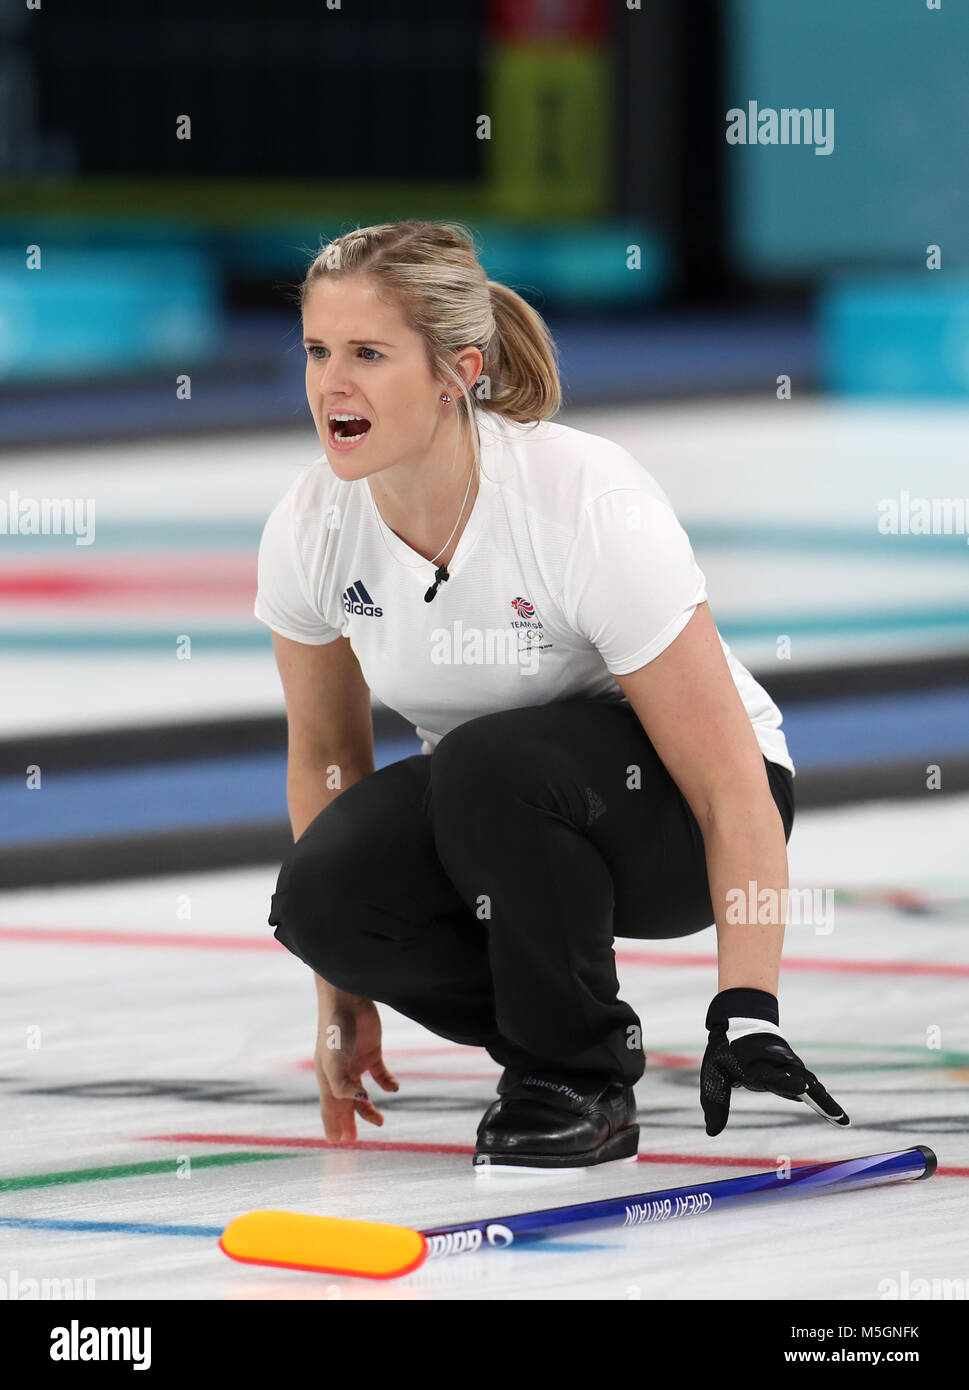 Great Britain's Vicki Adams during the Women's Semi-Final against Sweden at the Gangneung Curling Centre during day fourteen of the PyeongChang 2018 Winter Olympic Games in South Korea. Stock Photo